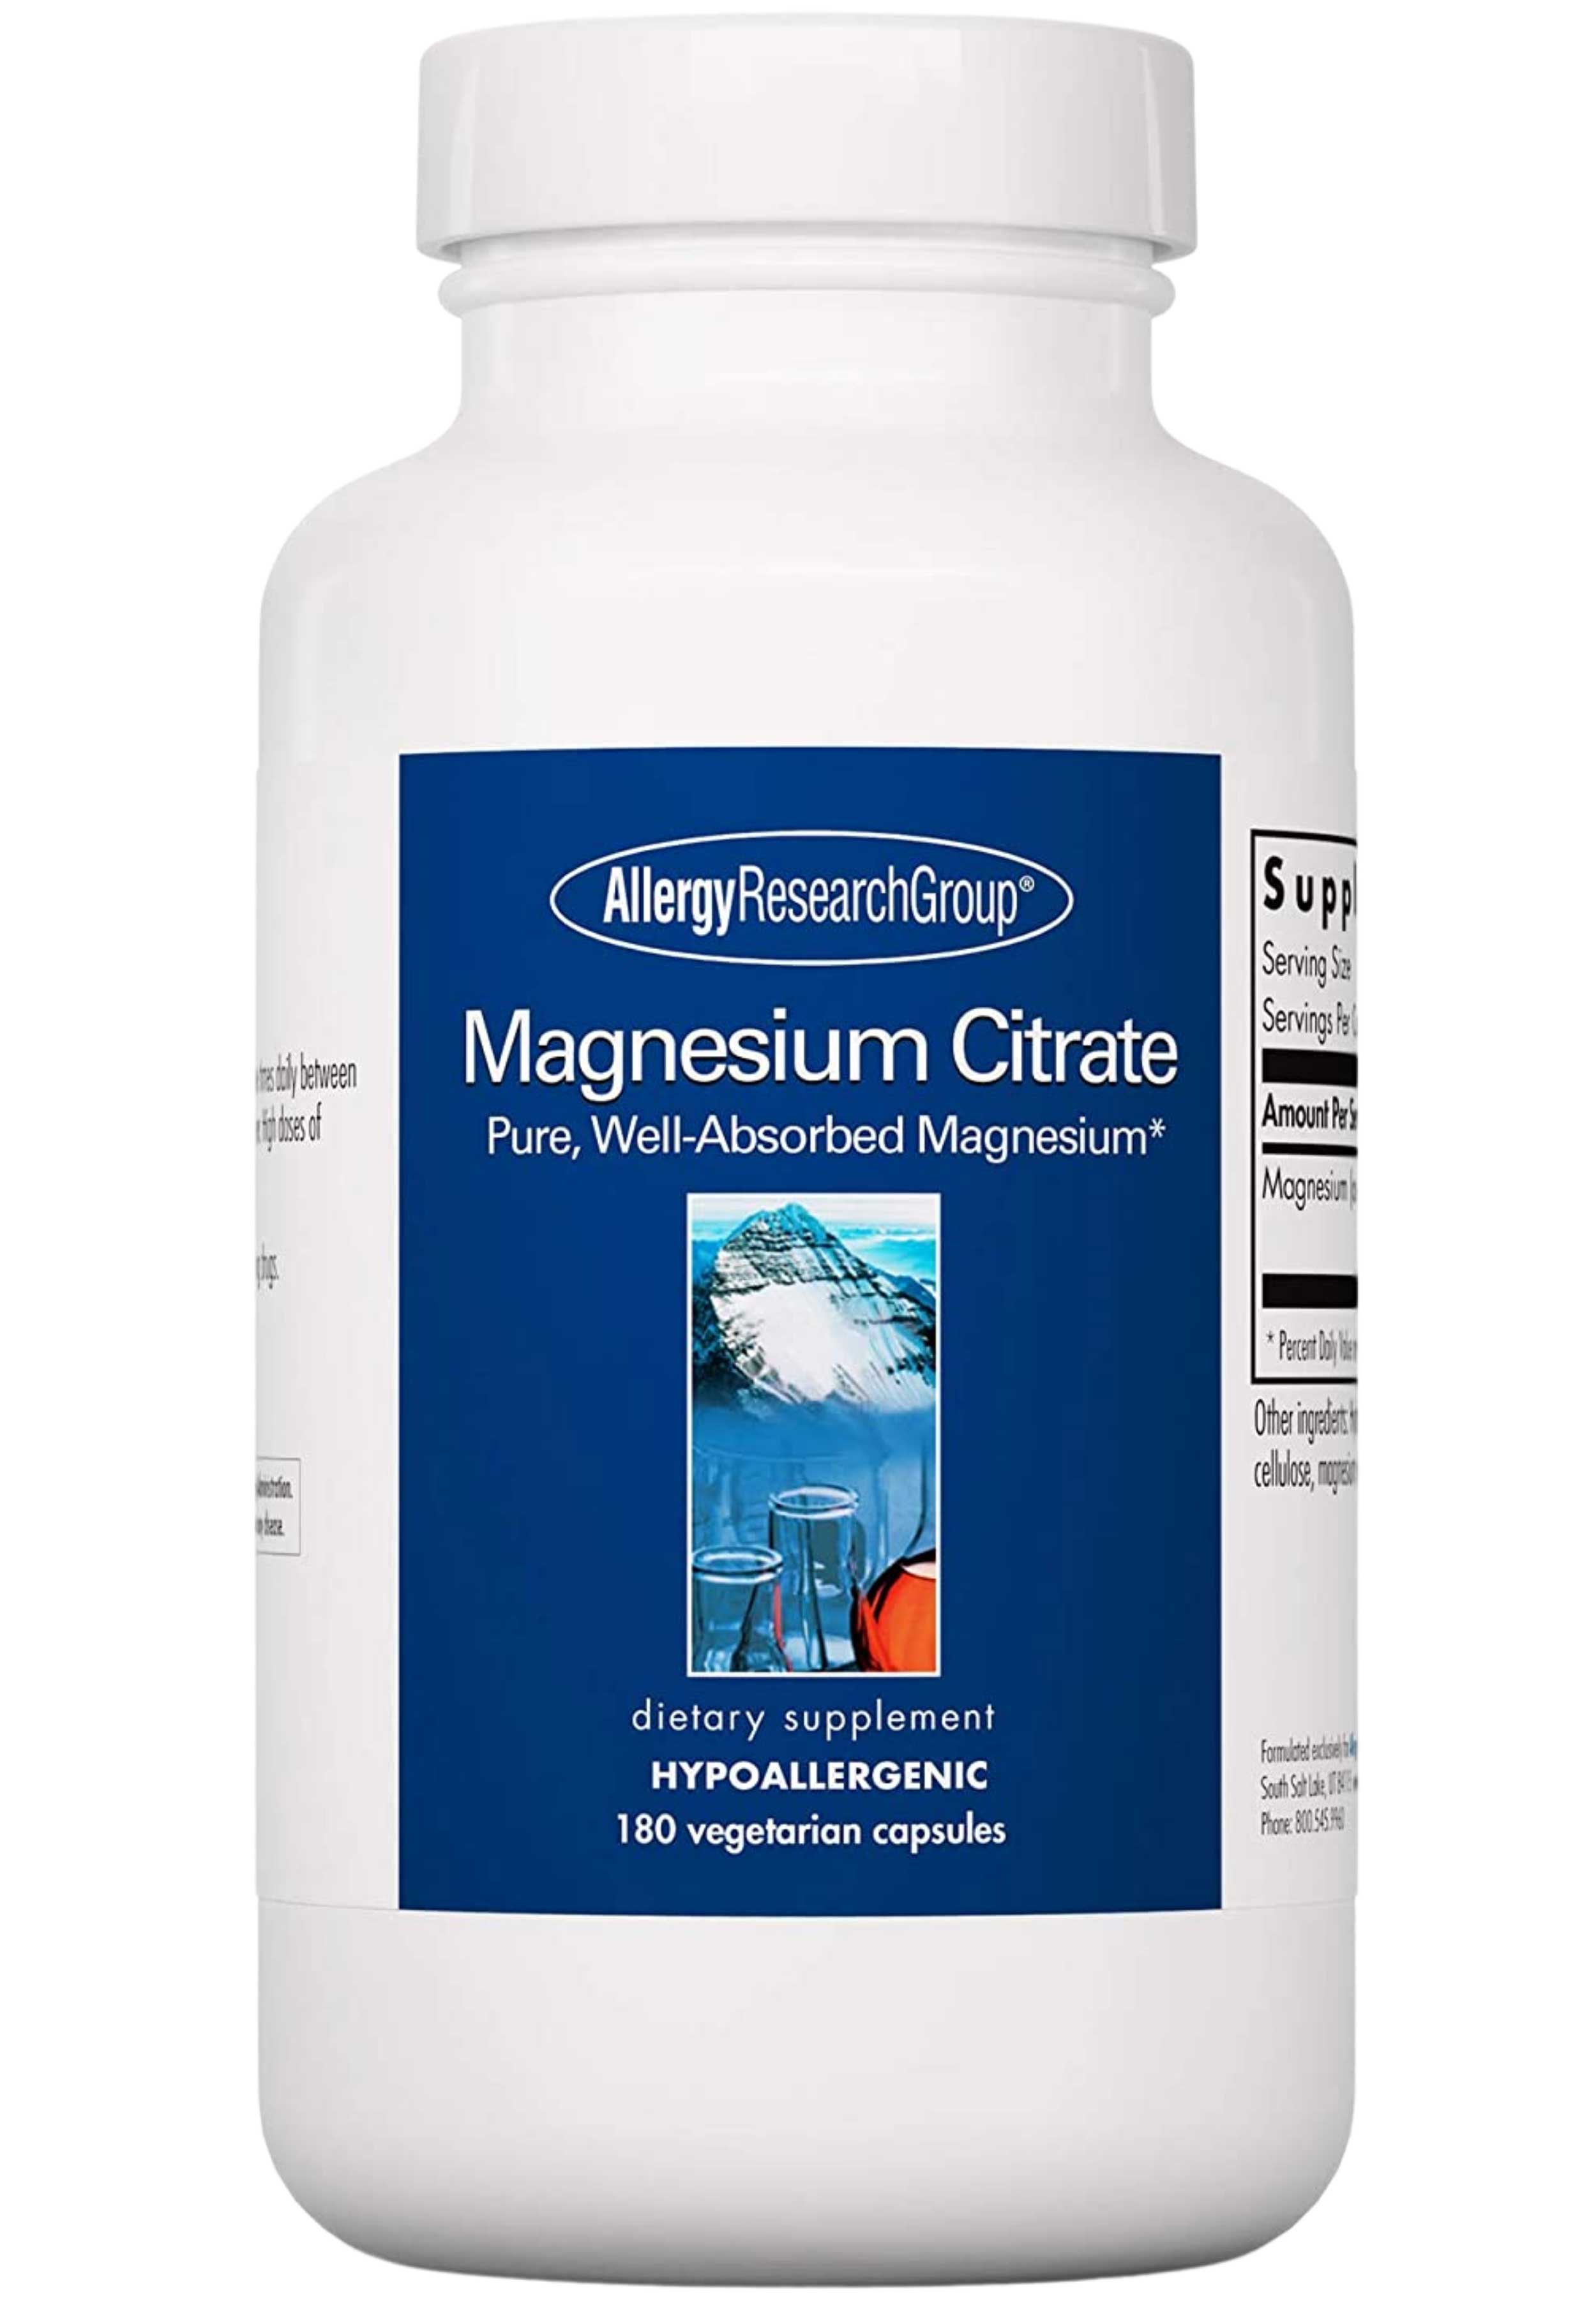 Allergy Research Group Magnesium Citrate